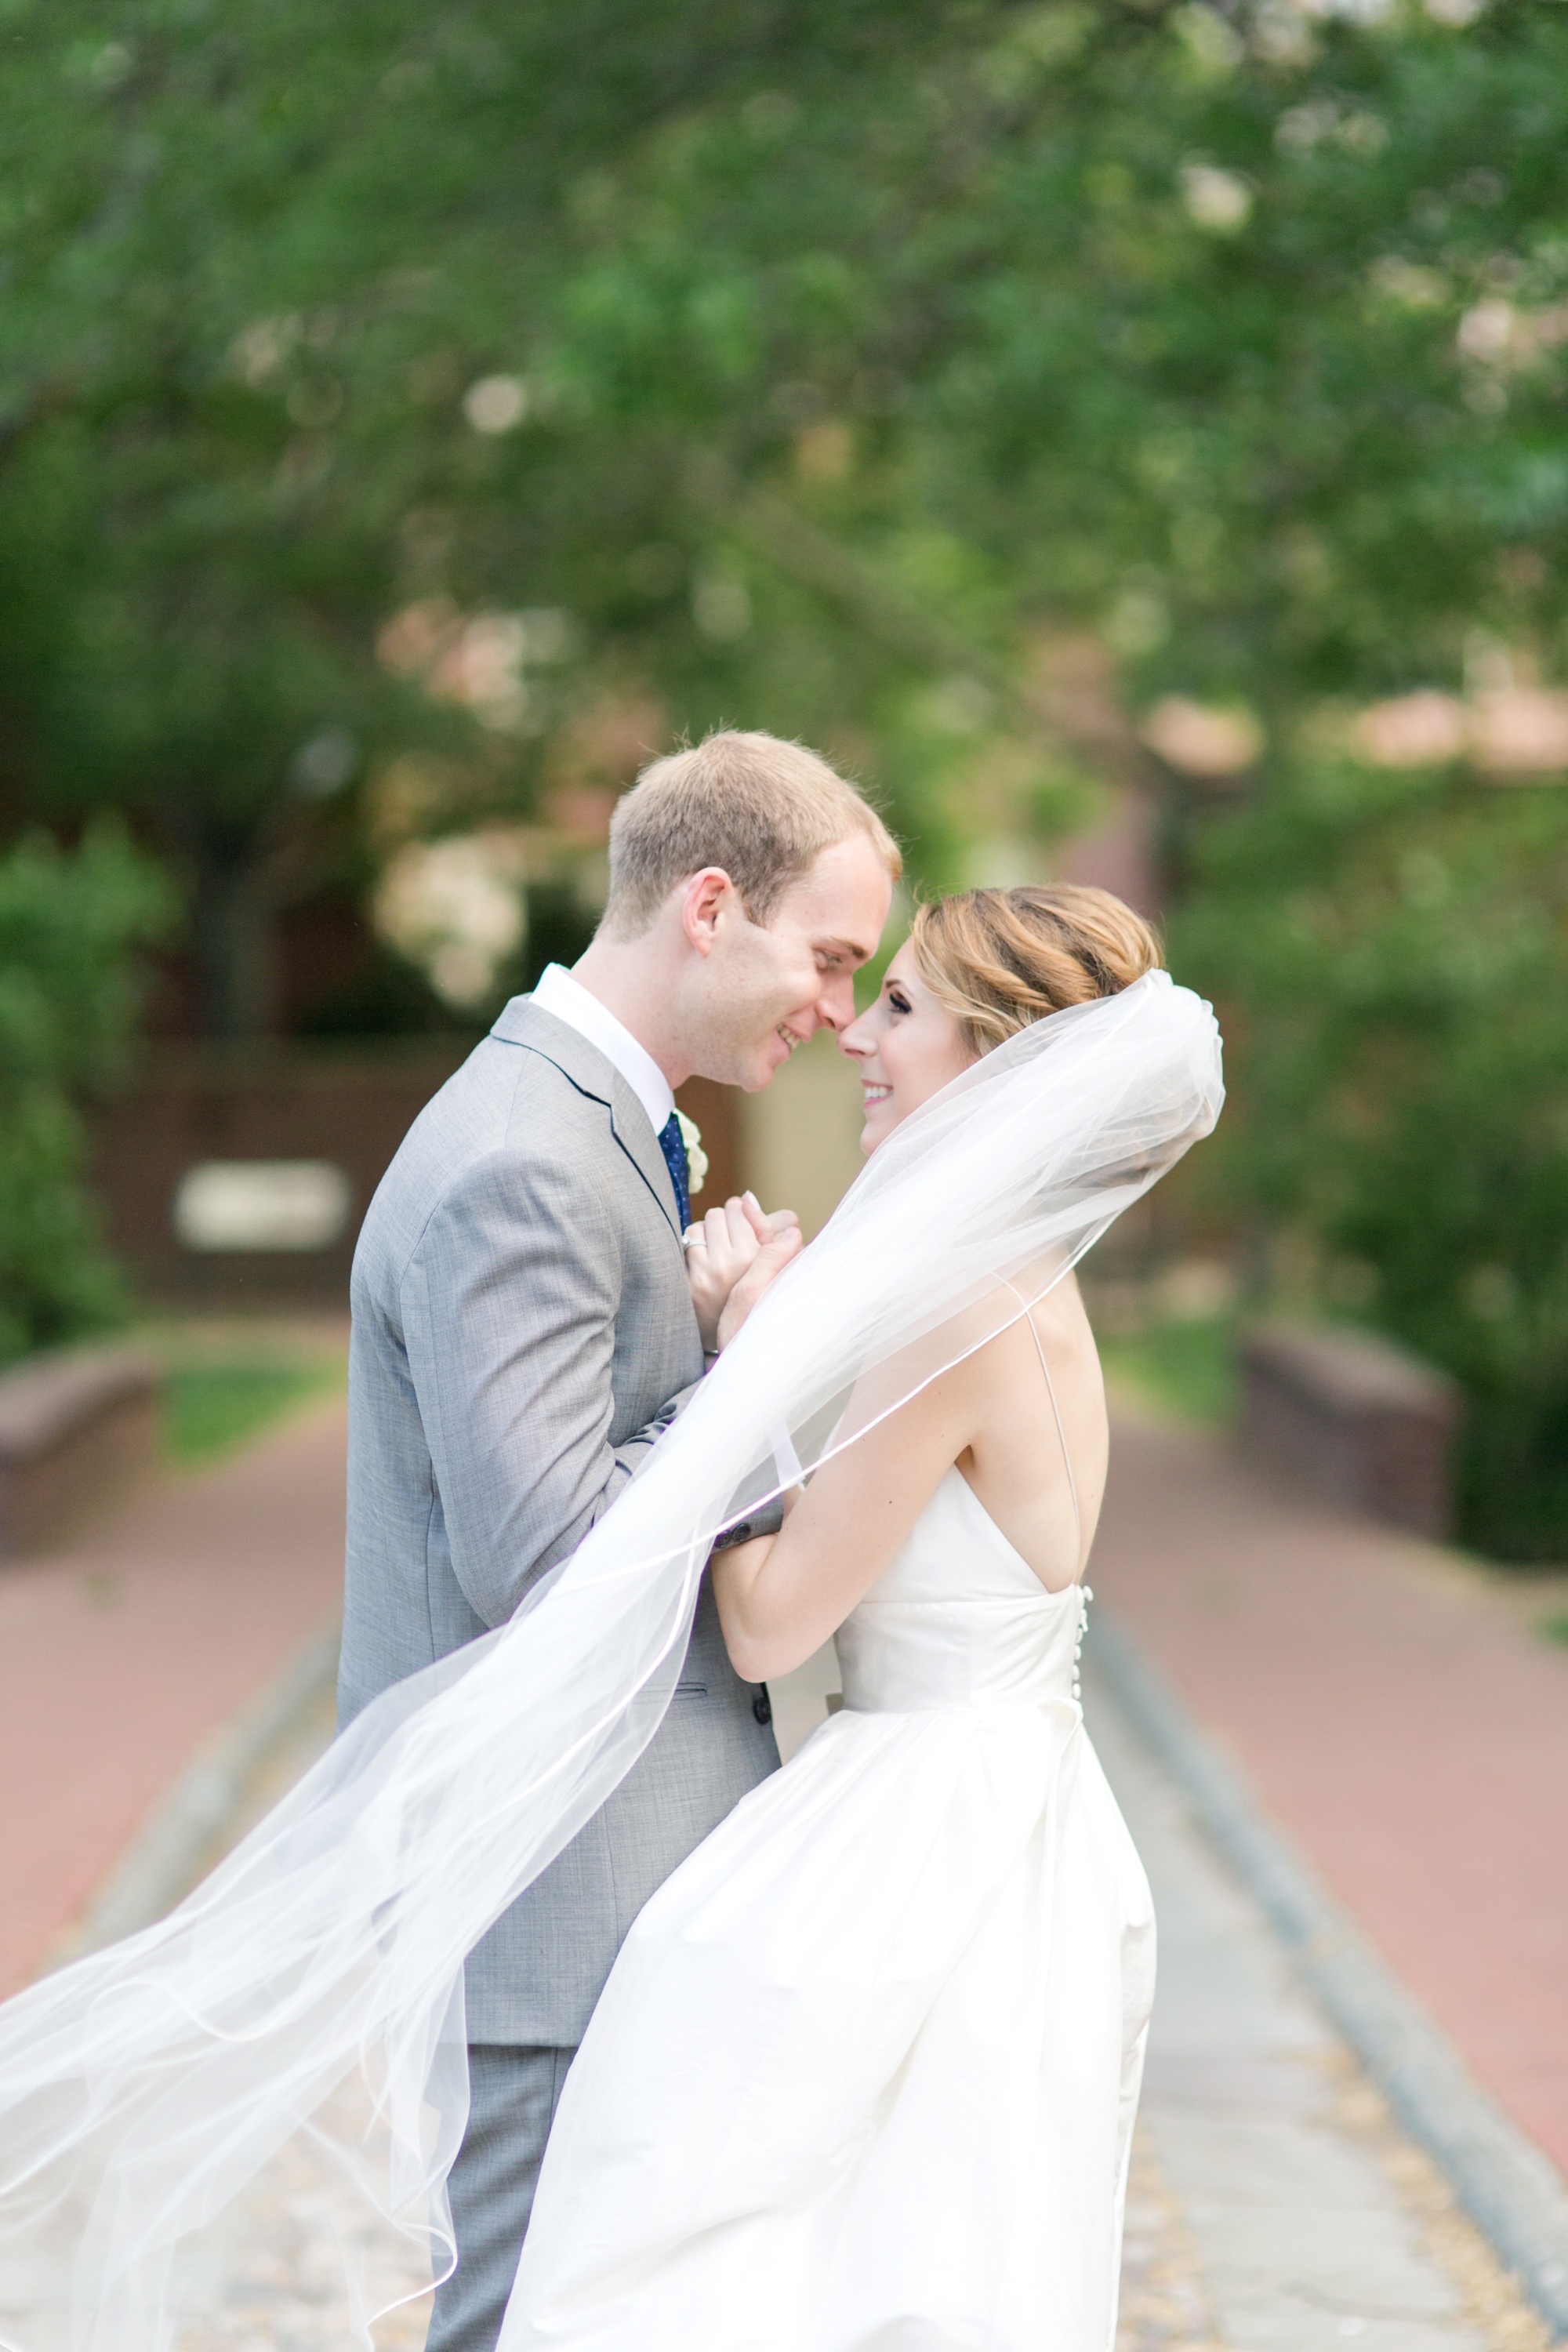 Colonial Dames Society Wedding Photography in Philadelphia, PA